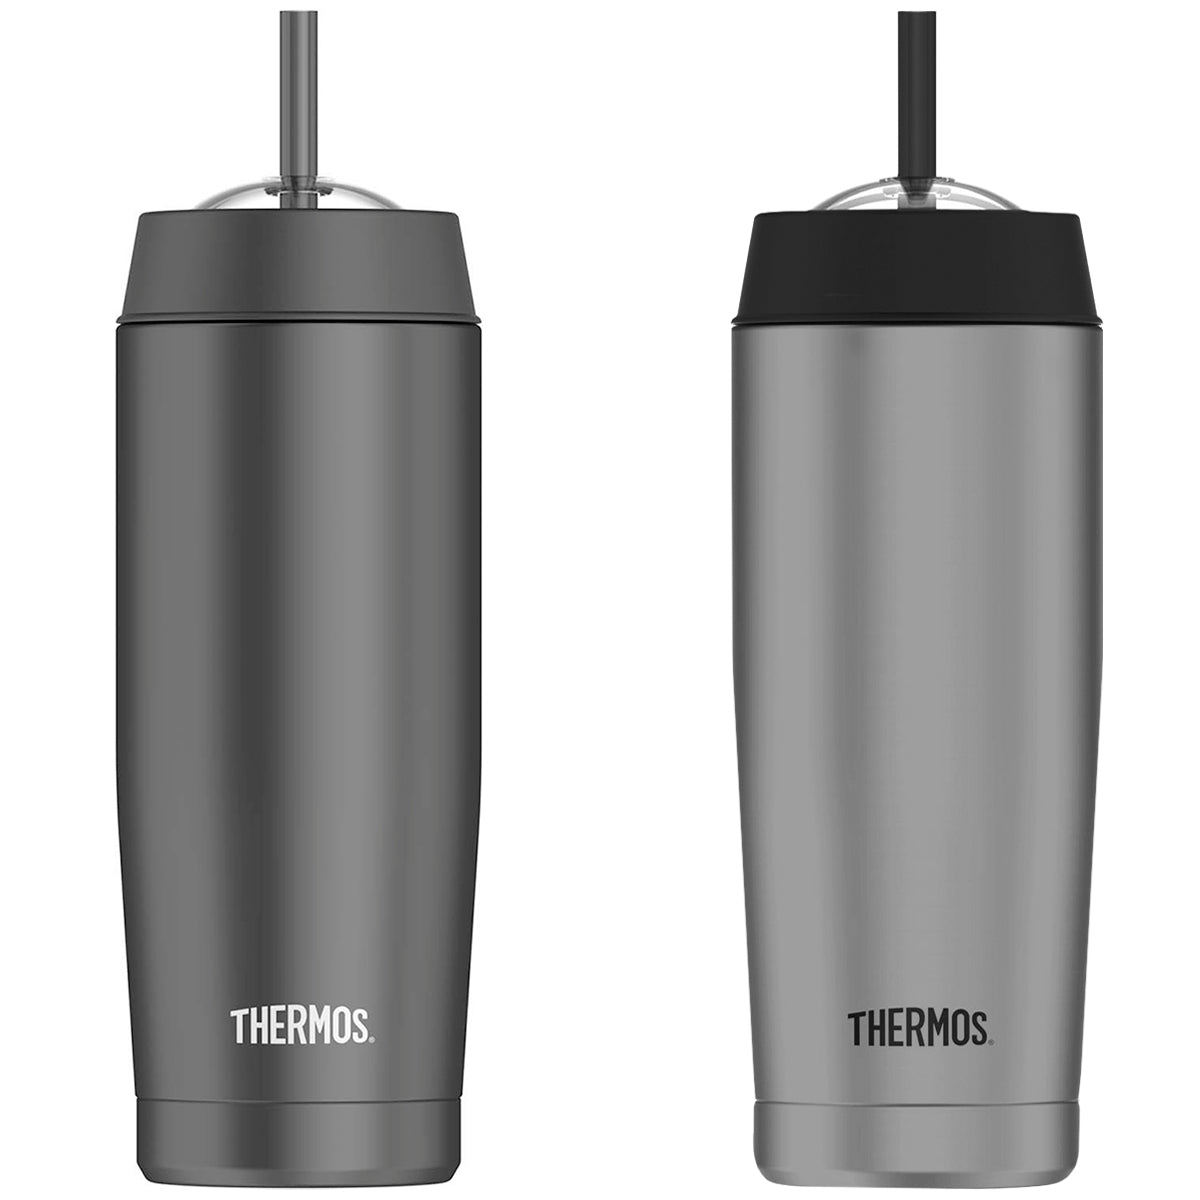 Thermos 16 oz. Vacuum Insulated Stainless Steel Cold Cup with Straw Thermos